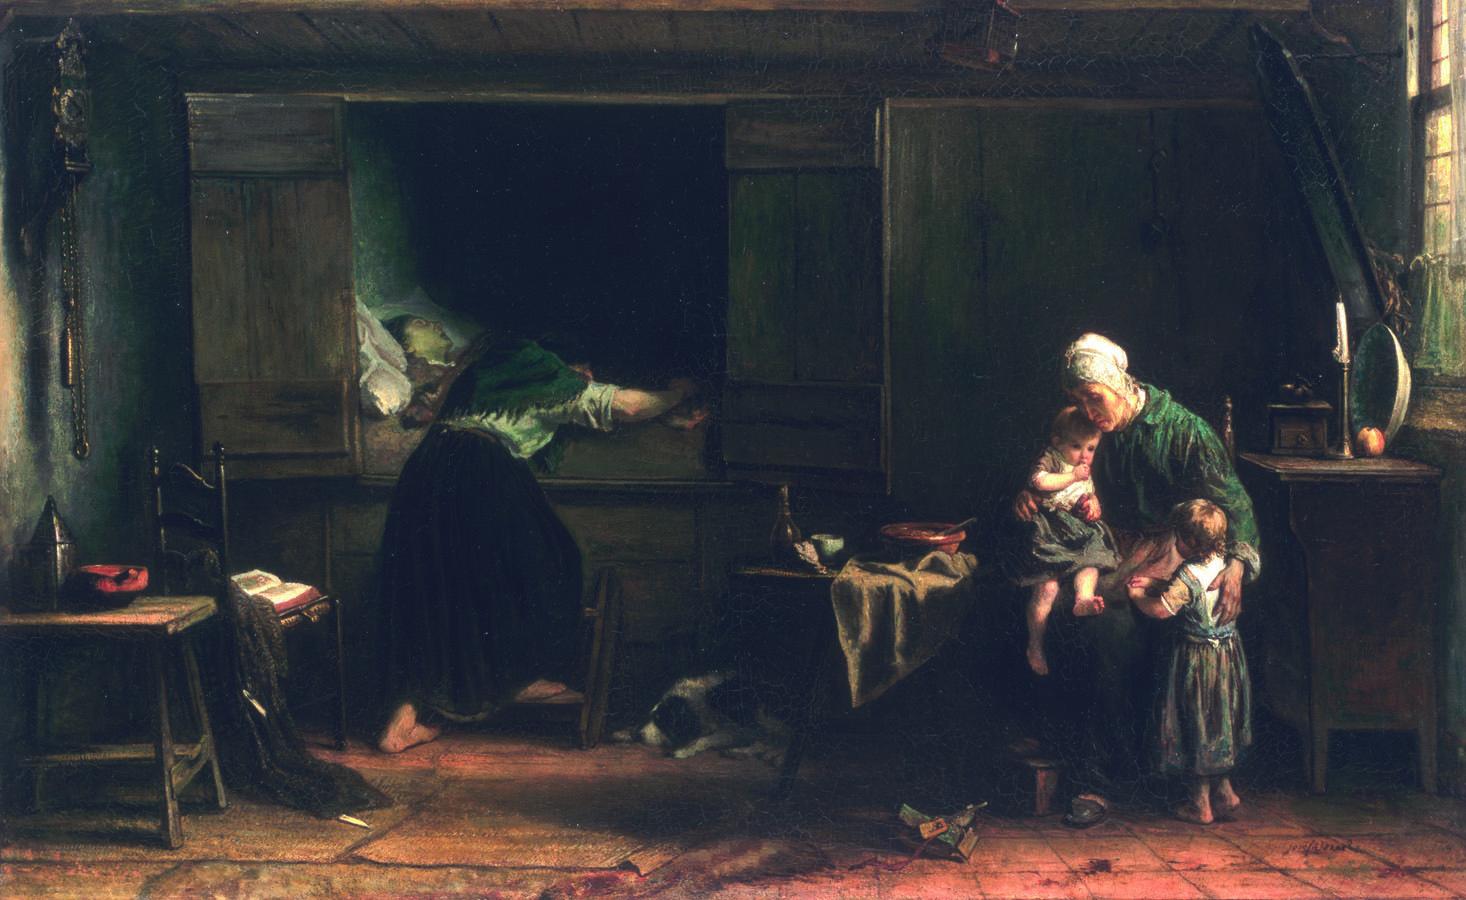 Painting of interior scene with woman throwing herself over the pale body of a man while an older woman watches two children.